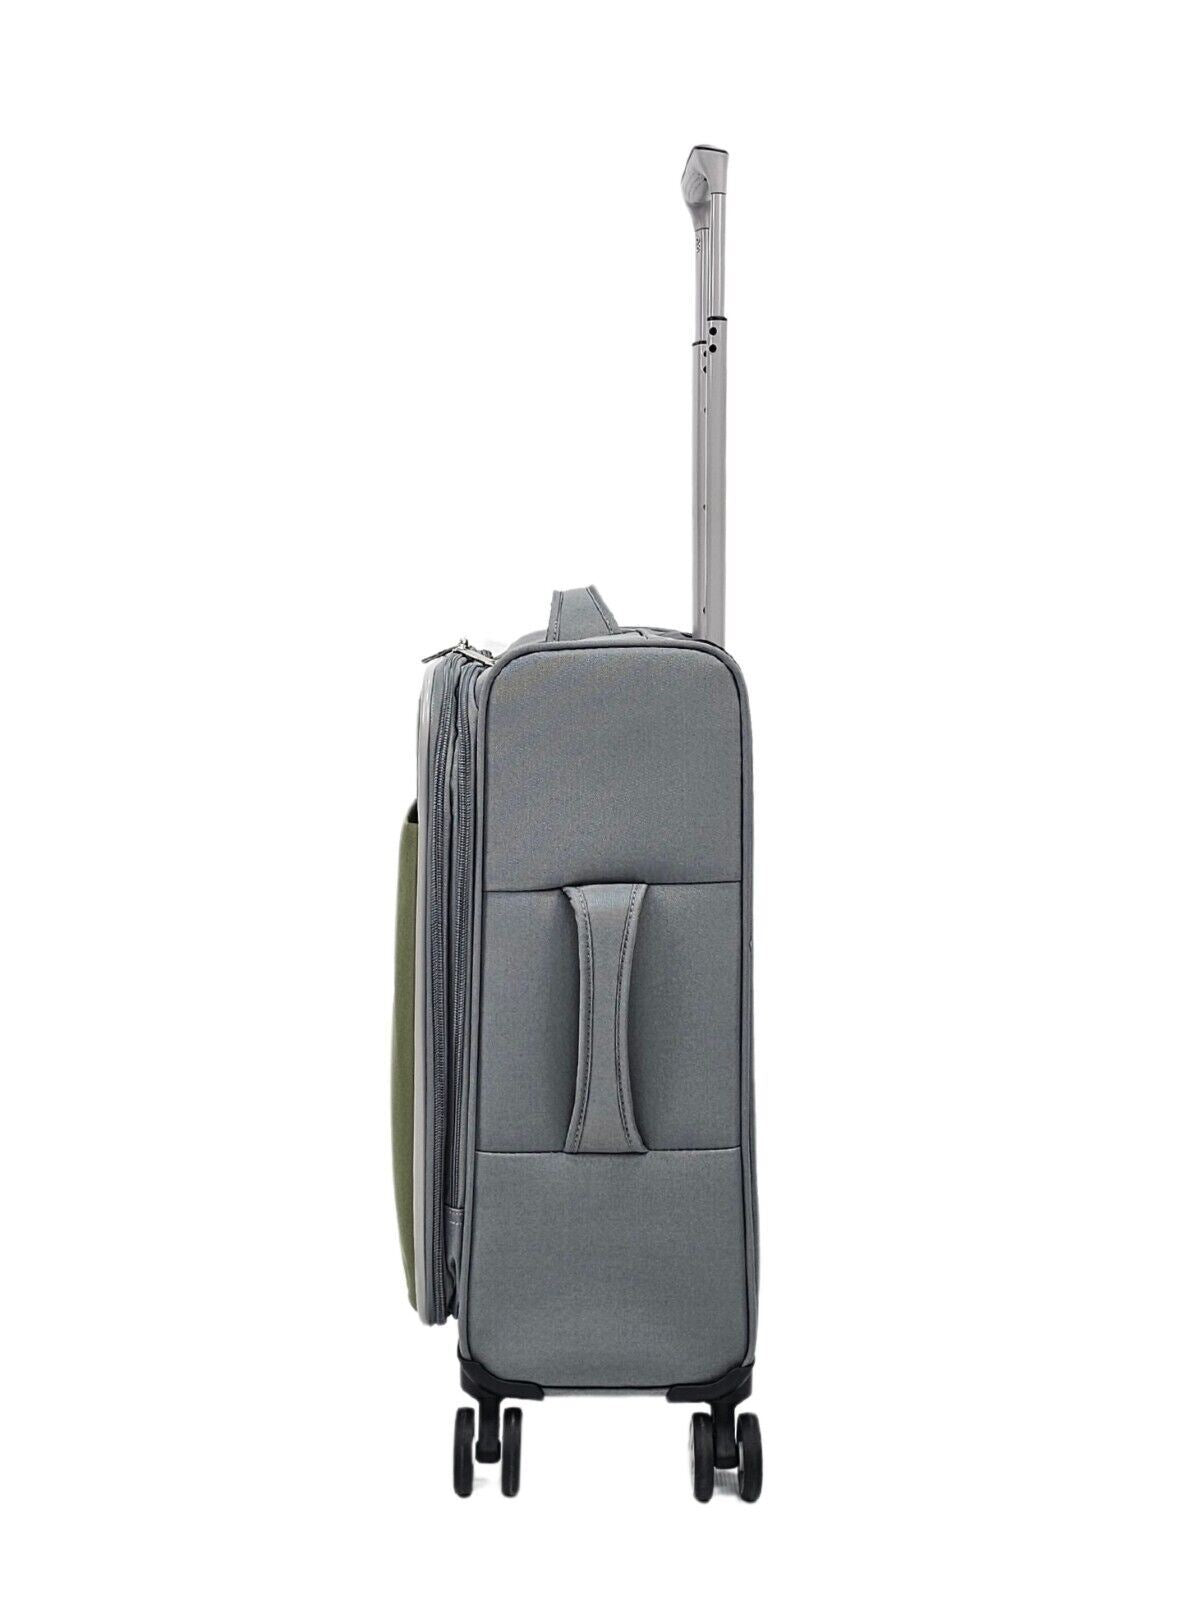 Lightweight Grey Cabin Suitcases 4 Wheel Luggage Travel Bag - Upperclass Fashions 